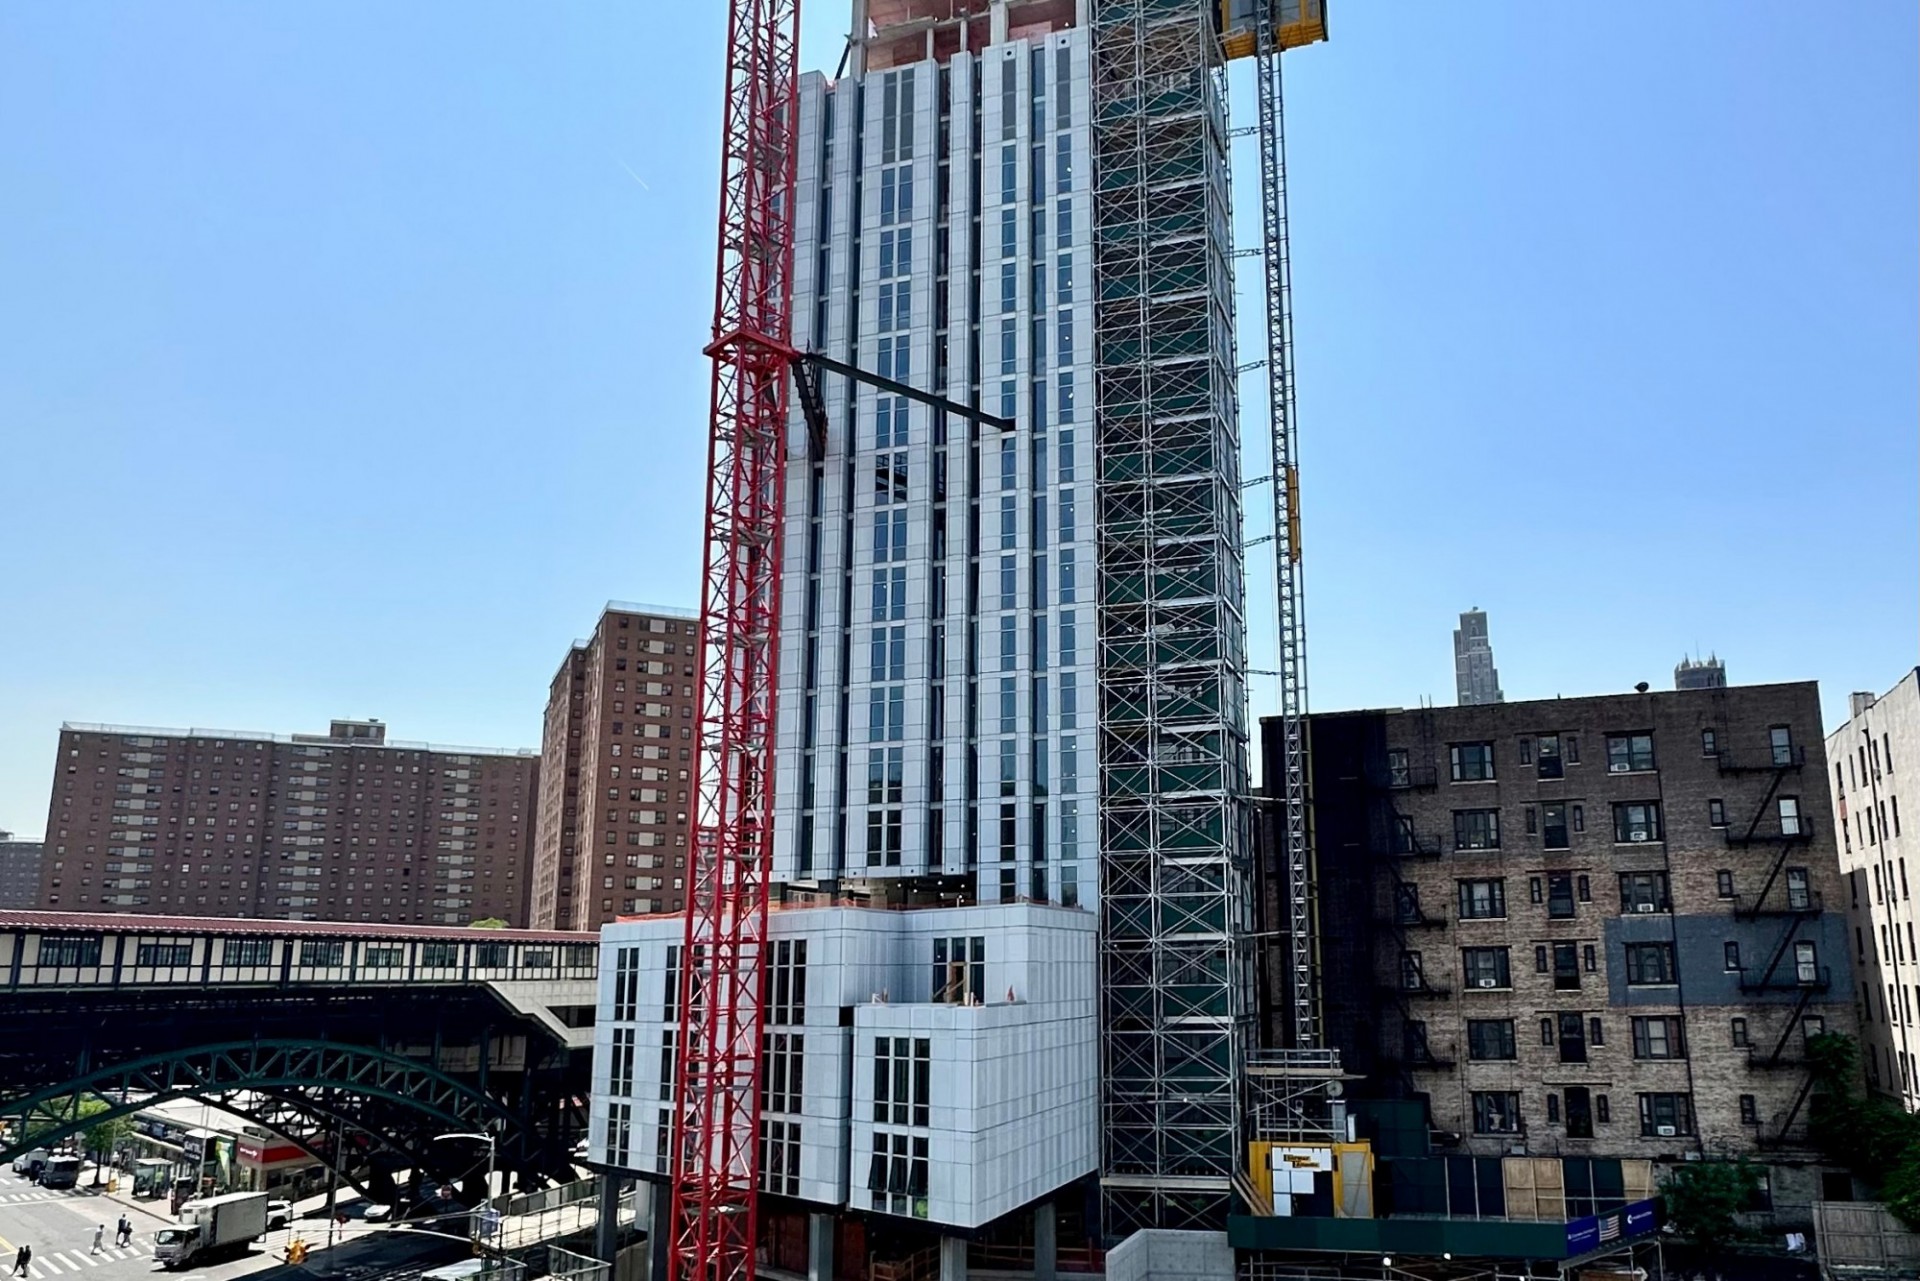 A view of the 600 W. 125th Street construction site which is 34 floors high, and has some facade panels installed around it. 